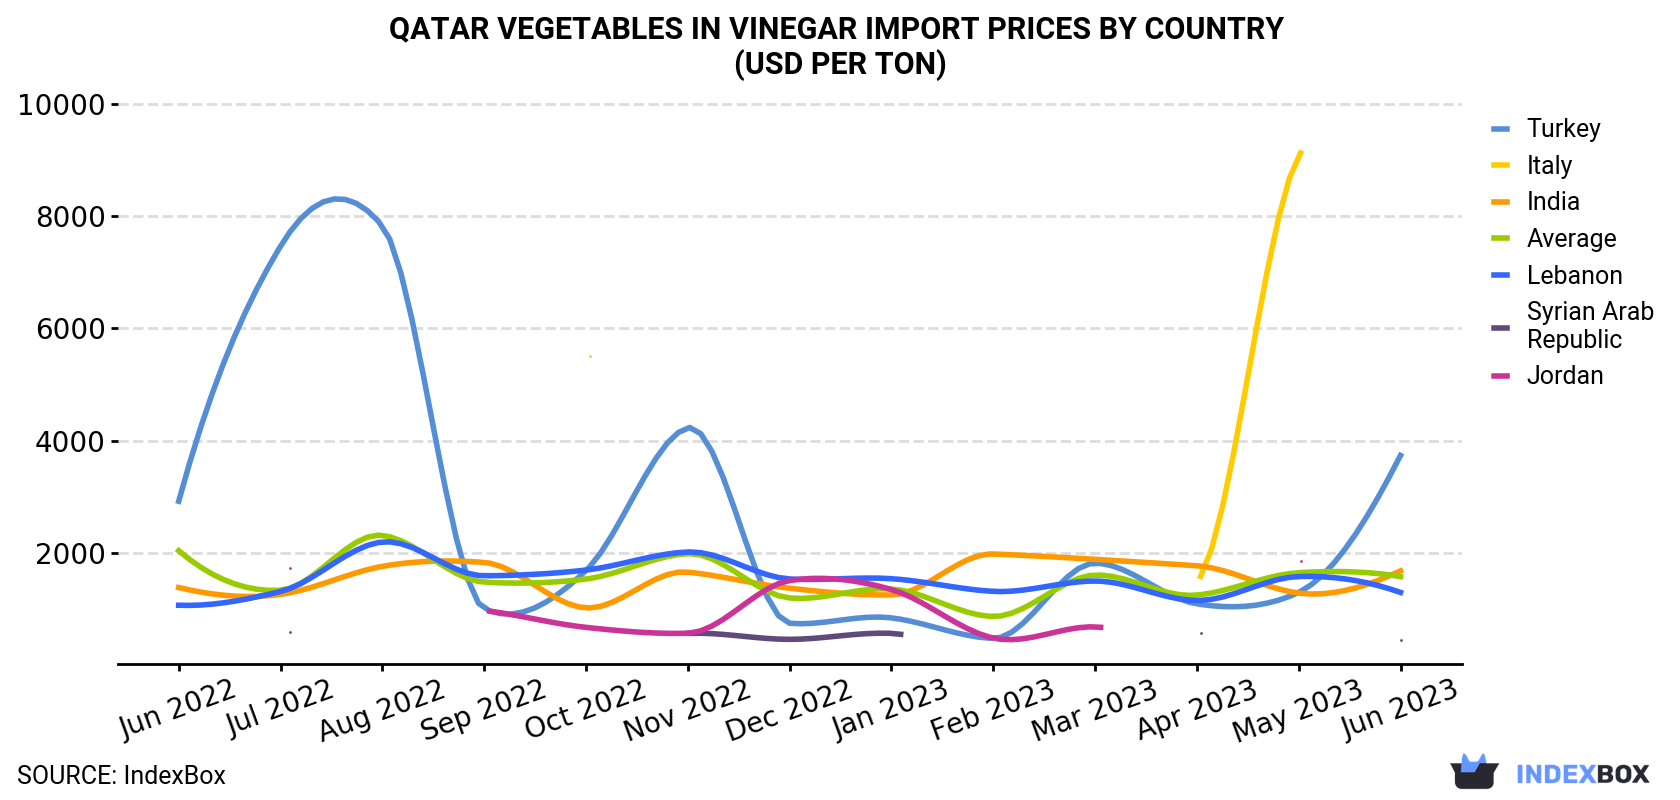 Qatar Vegetables In Vinegar Import Prices By Country (USD Per Ton)